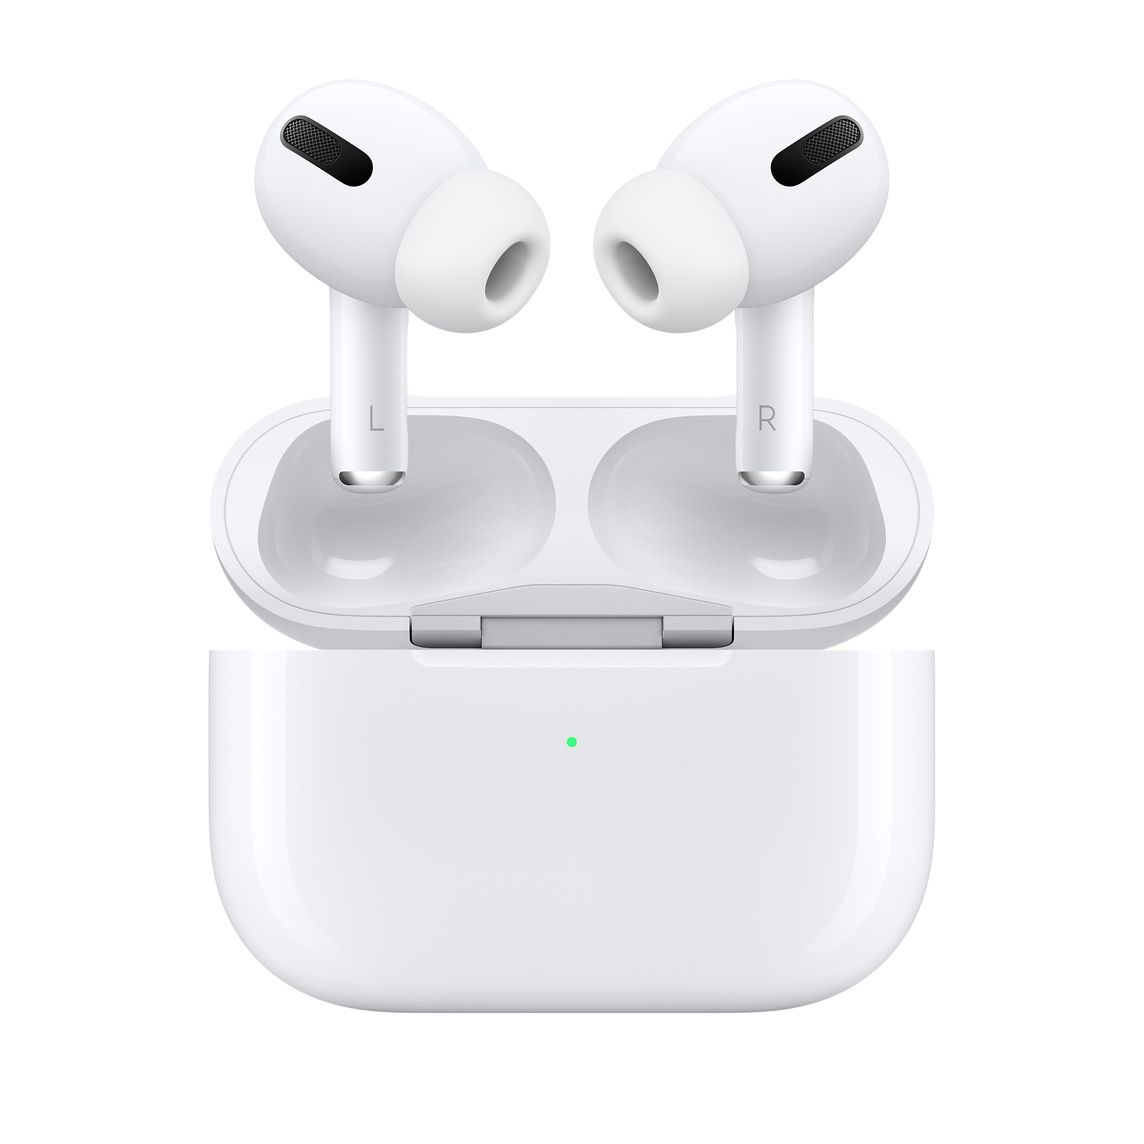 AirPods Pro | Apple (US)